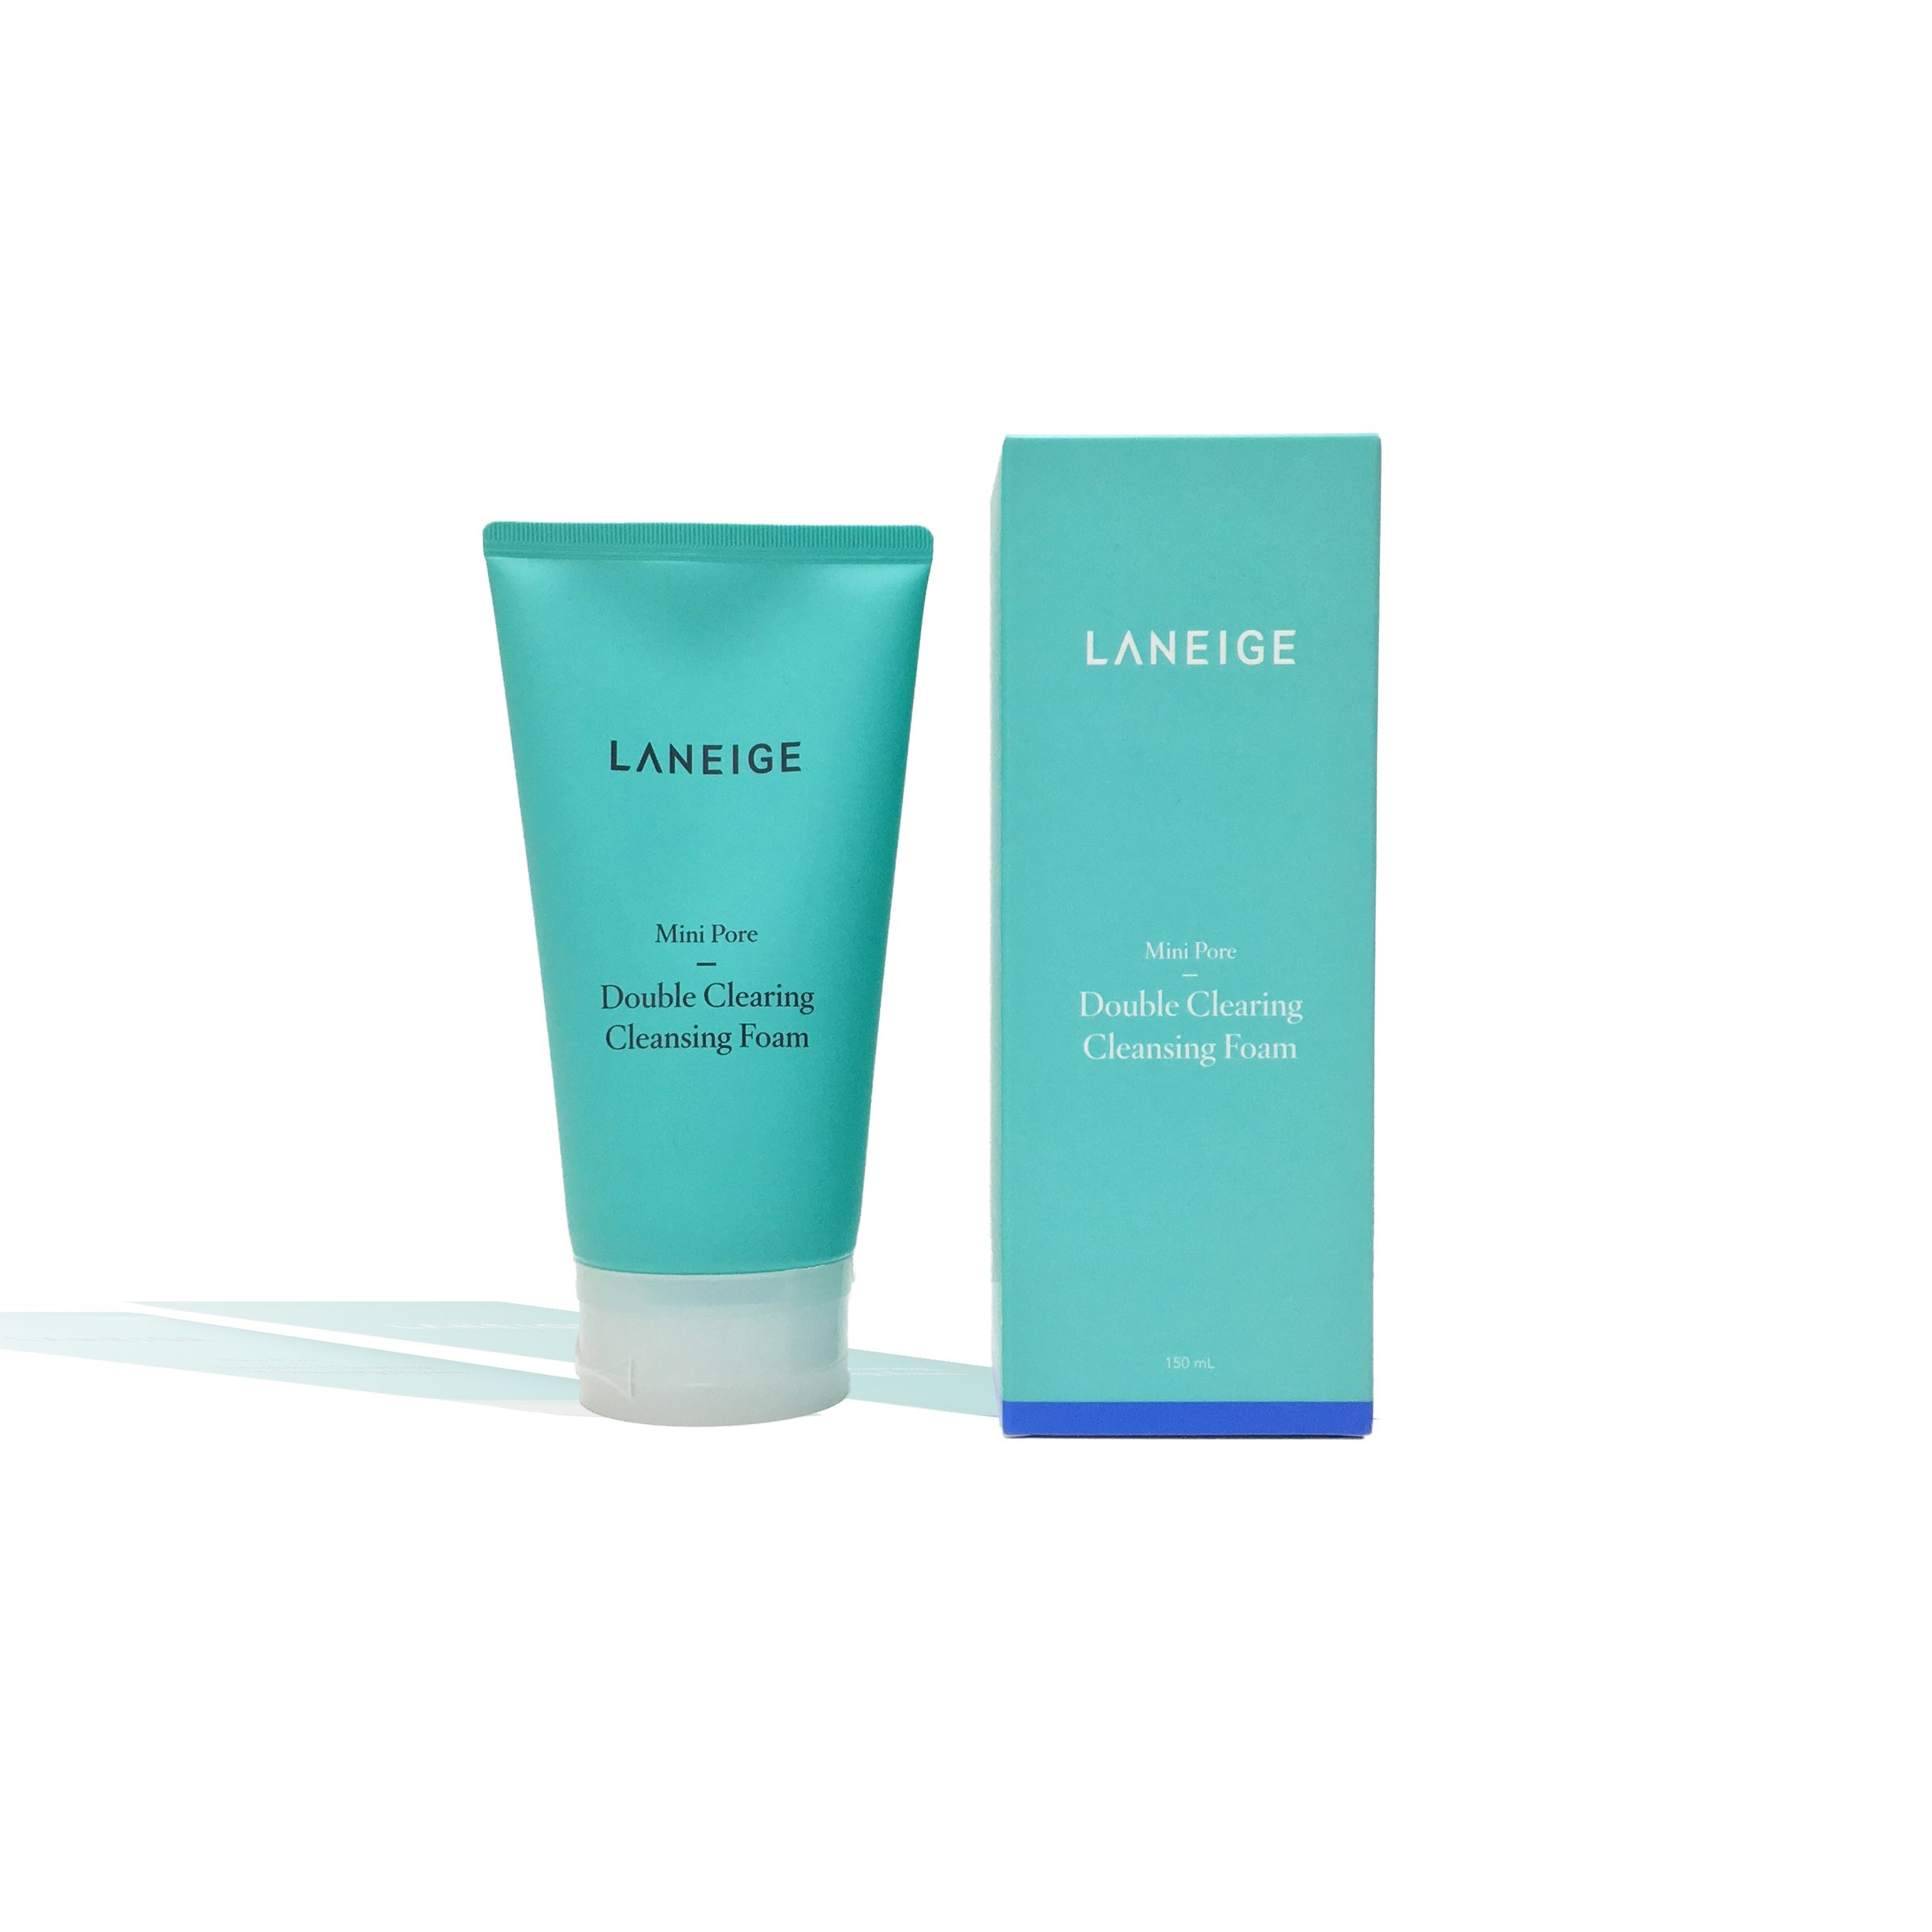 Laneige Mini-Pore Double Clearing Cleansing Foam